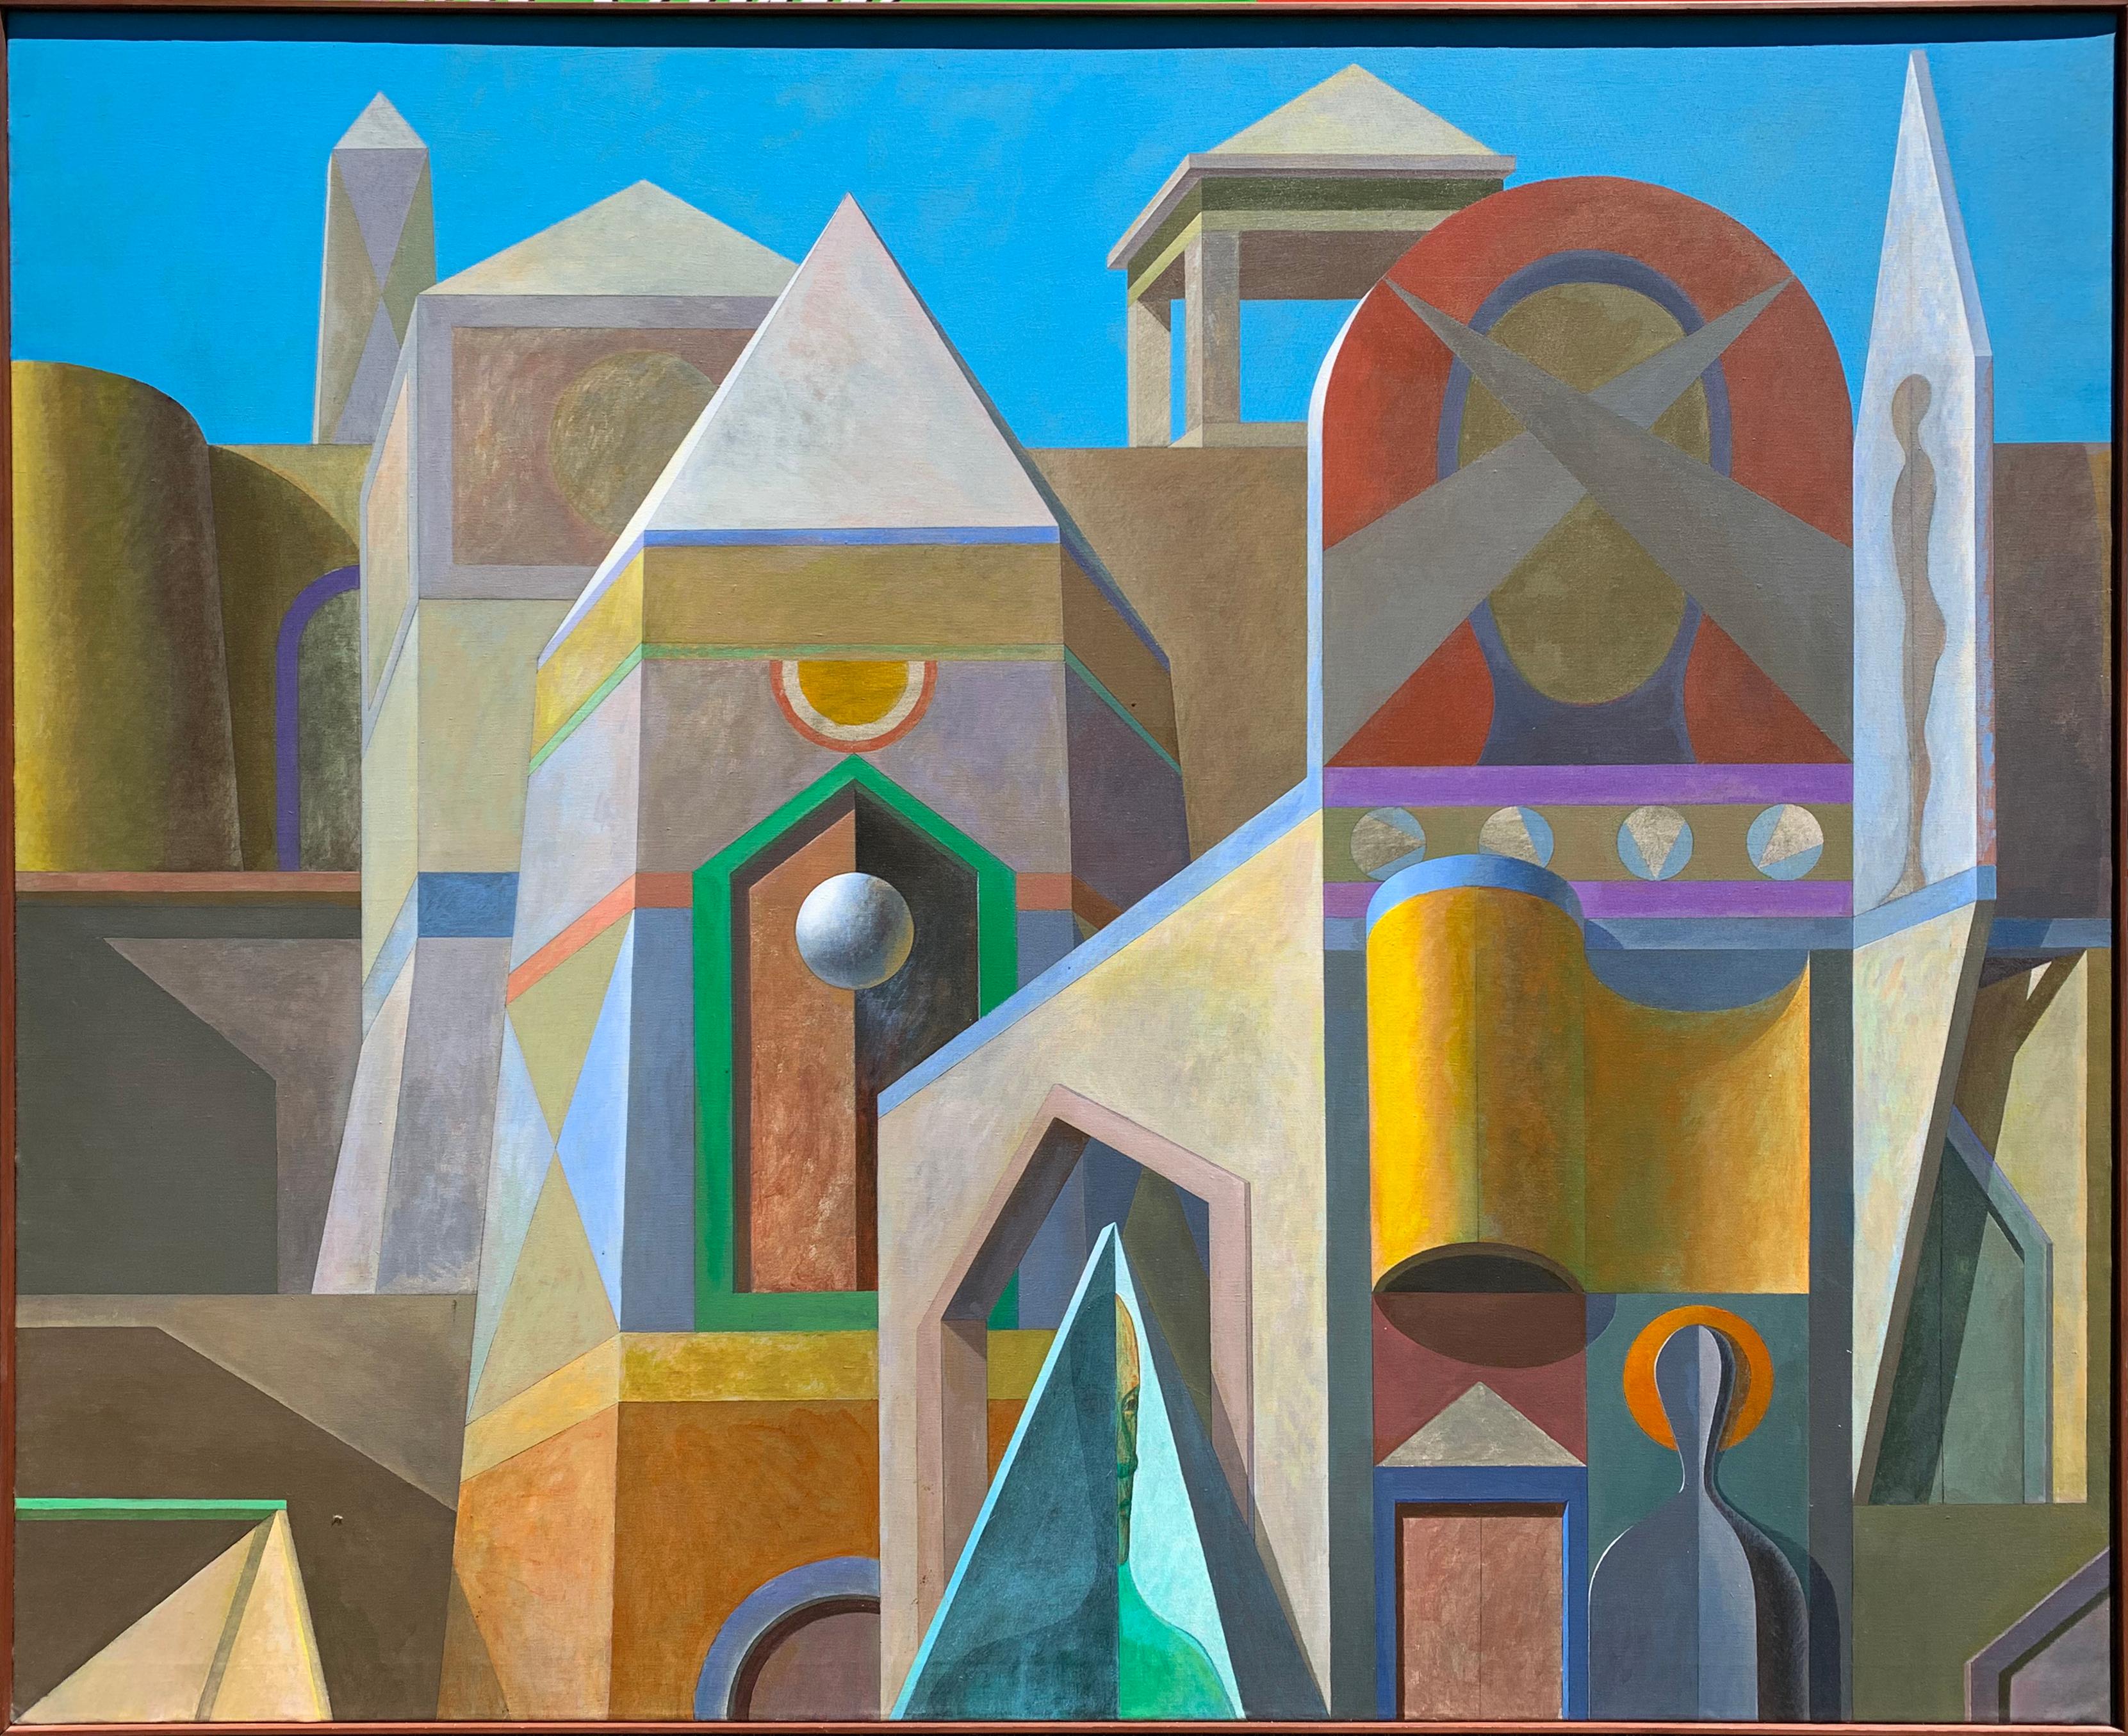 Architectural Abstract, Geometric Forms in Color, Modernist Mural, Oil on Canvas - Painting by Joseph Amarotico